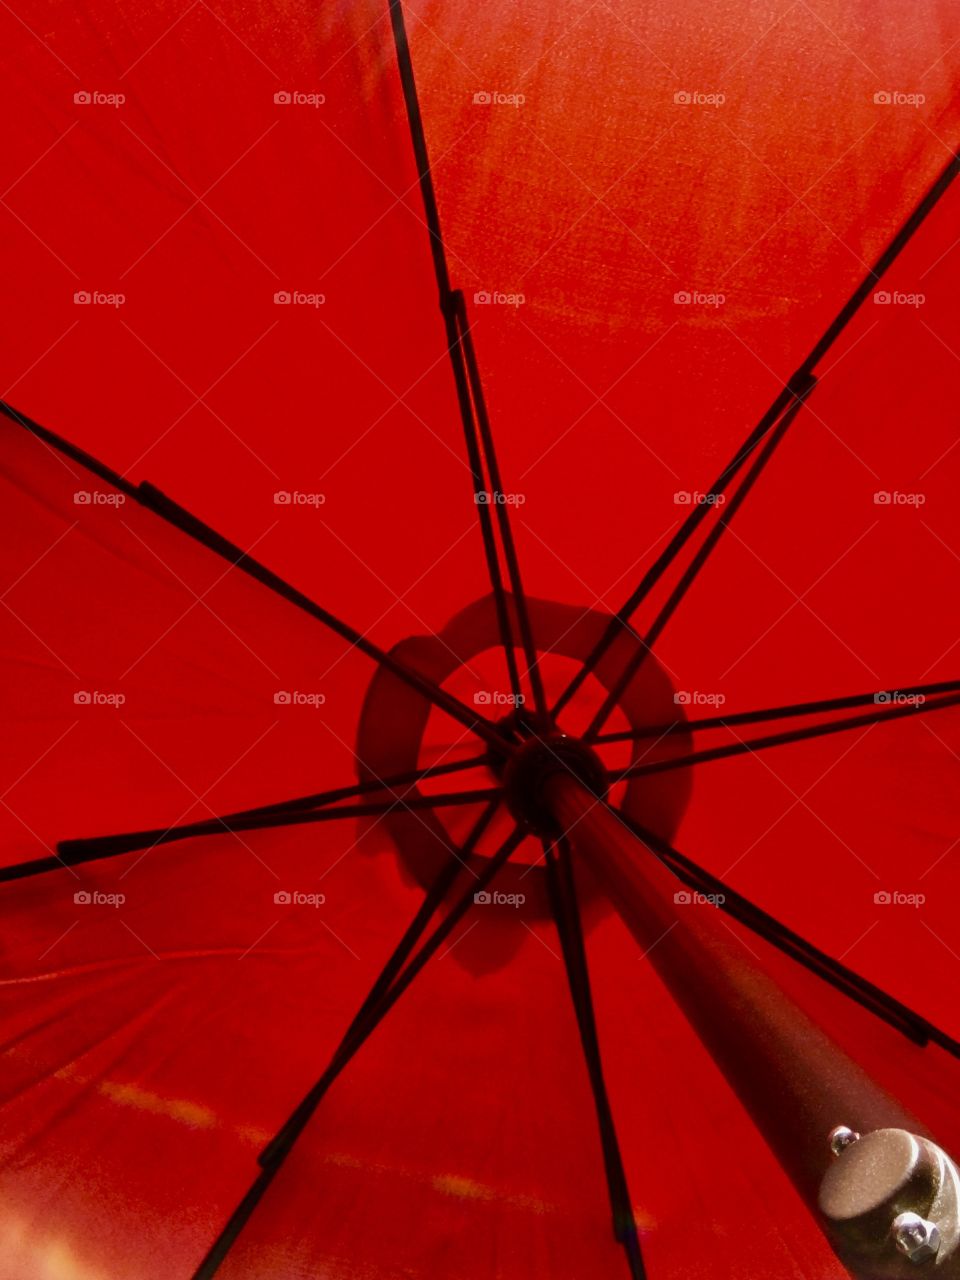 Lunch under the red umbrella 